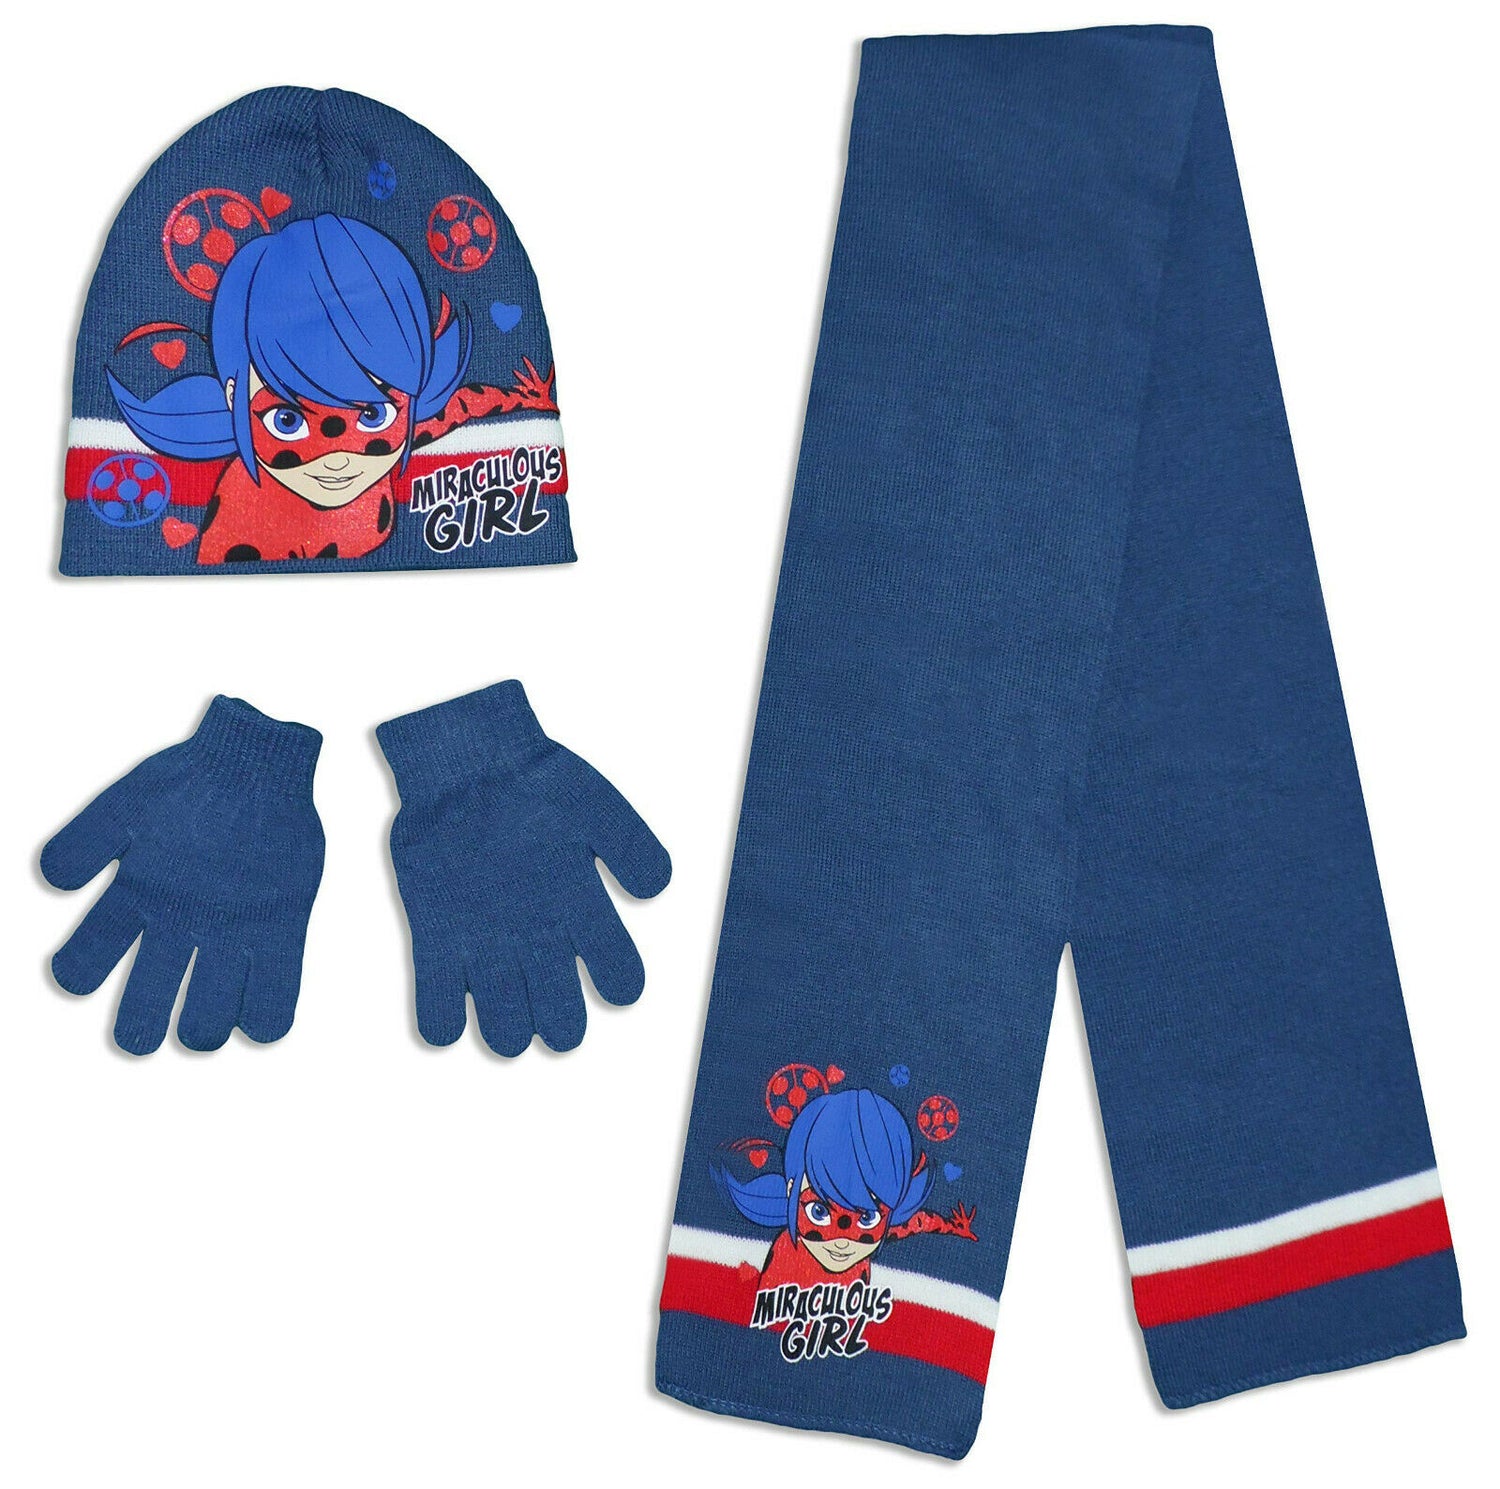 Miraculous Tales Of Ladybug & Cat Noir Hat, Glove & Scarf Set. Perfect For Any Fan Ages 2-5 (52cms), Ages 5-8 (54cms) In Navy Blue. These Are Official Merchandise.